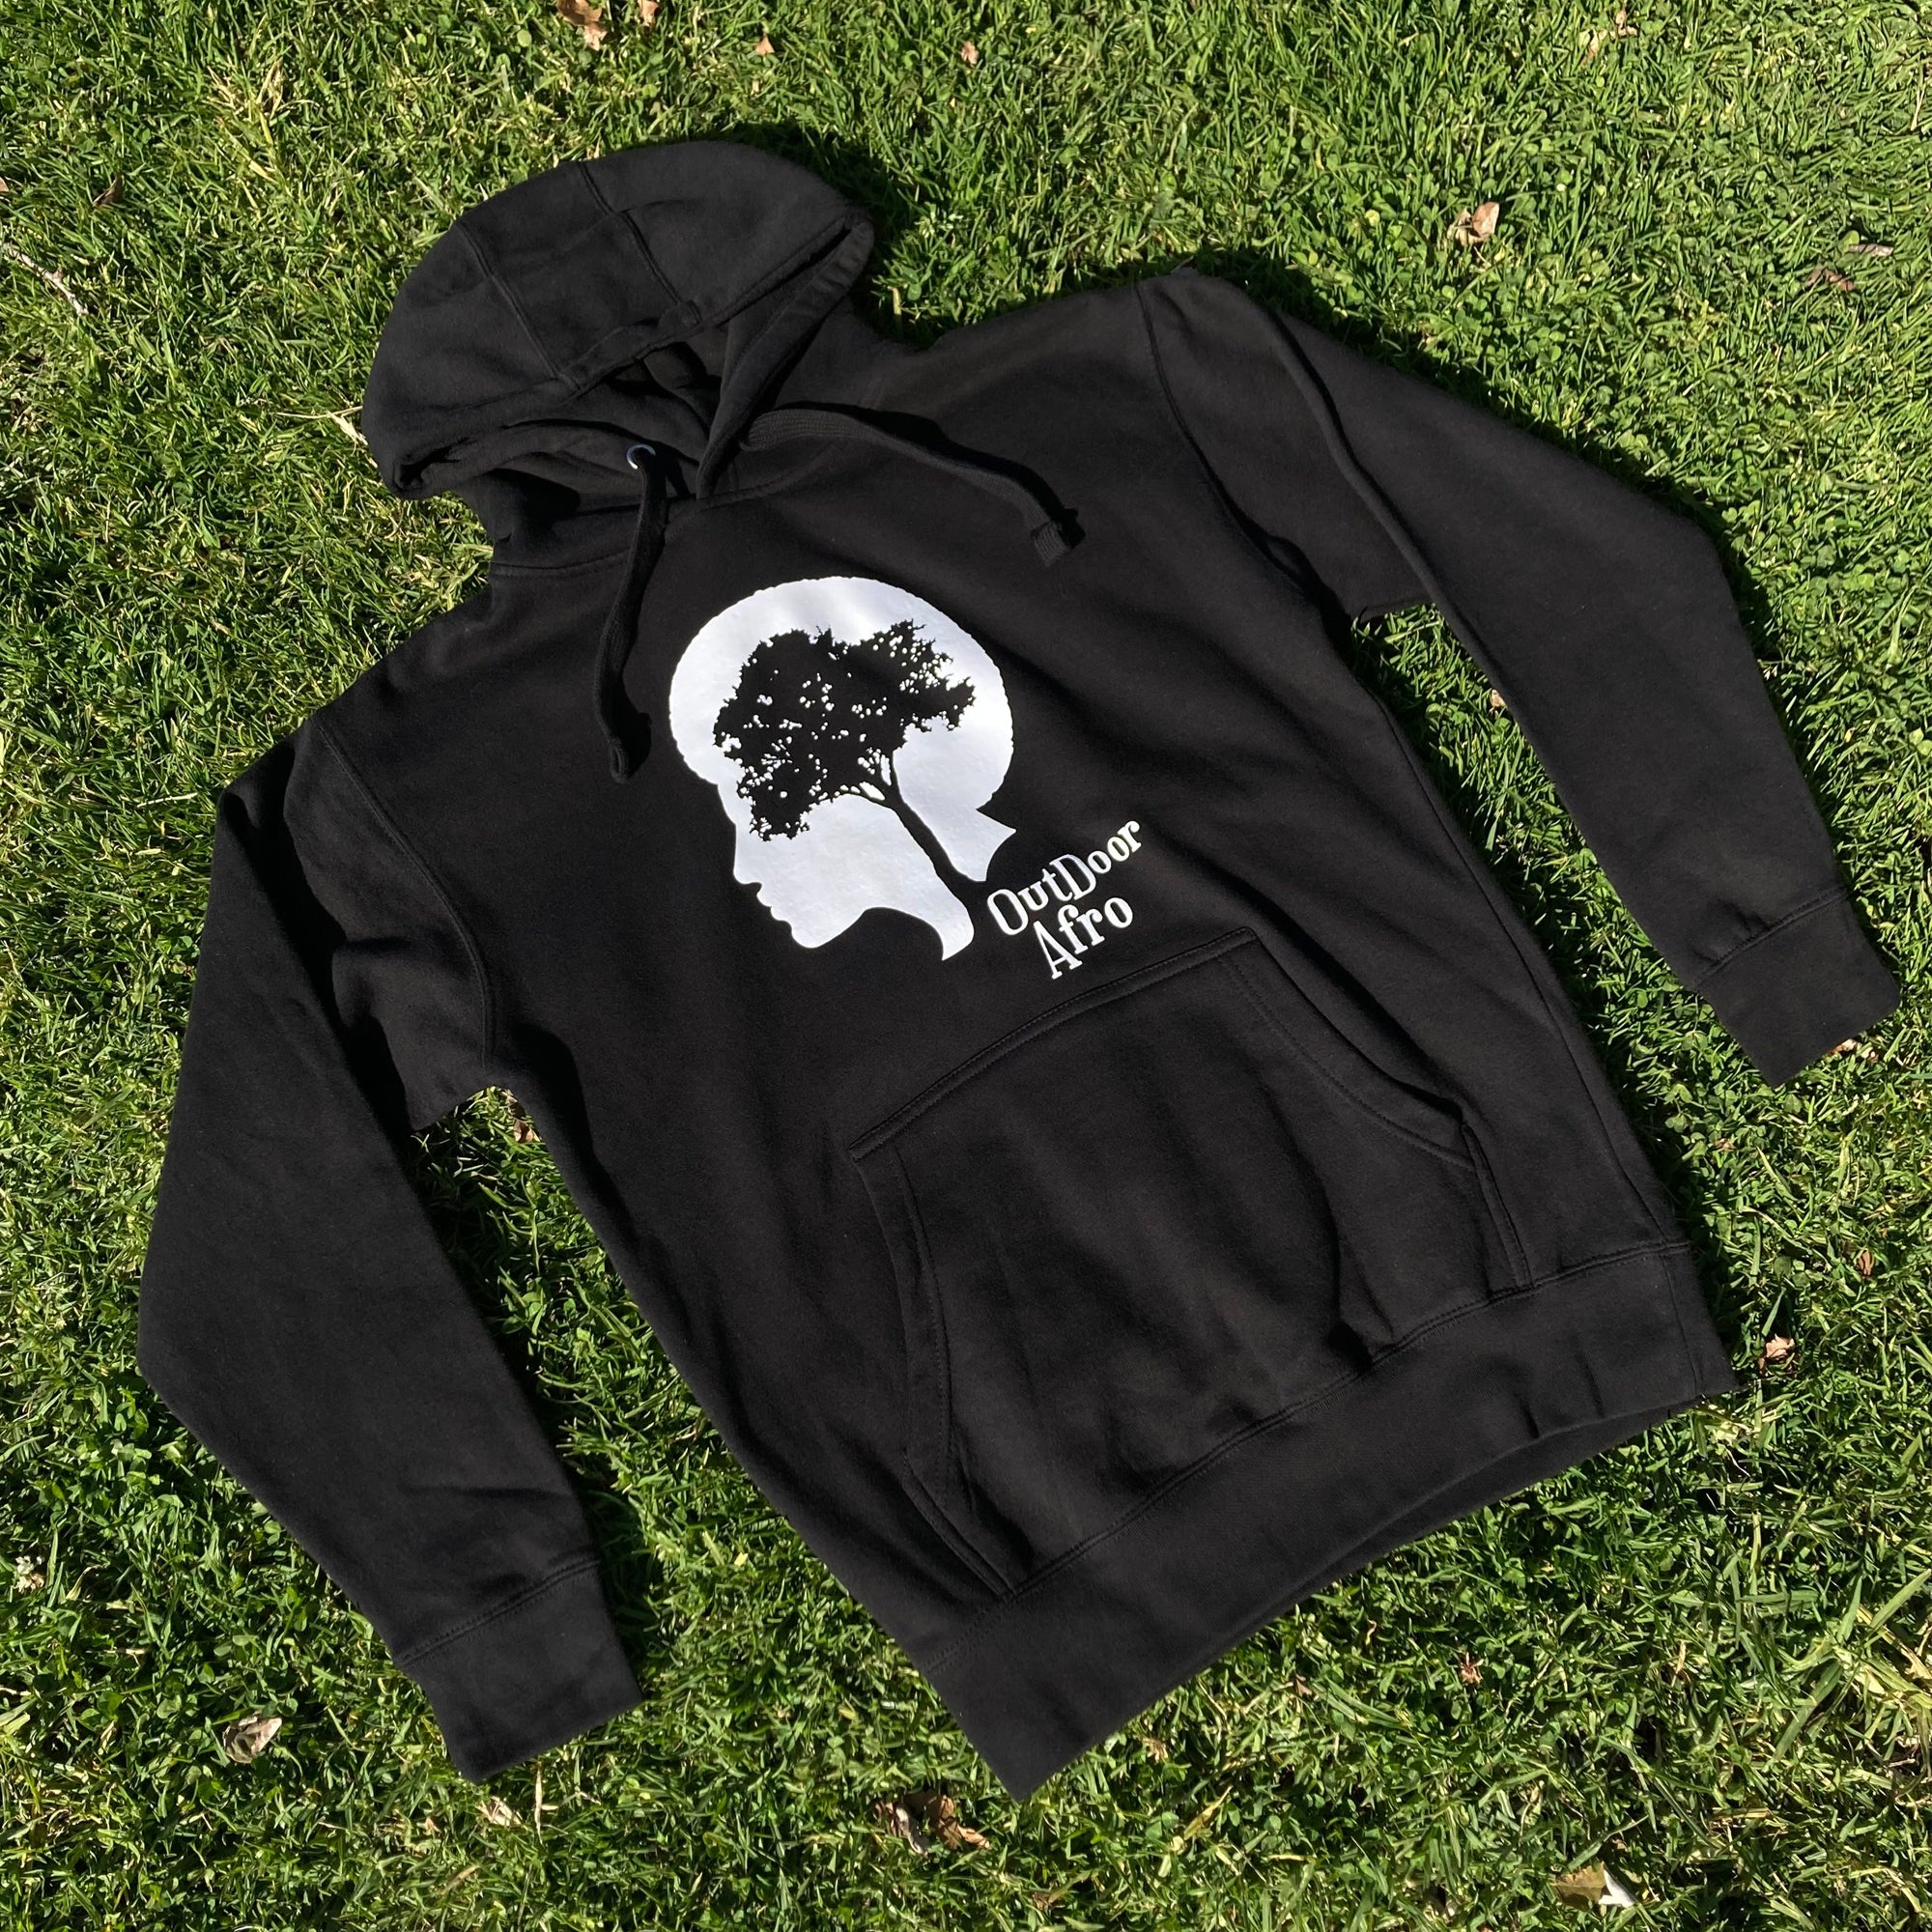 Black hoodie with OutDoor Afro logo and wordmark lying outdoors on grass.